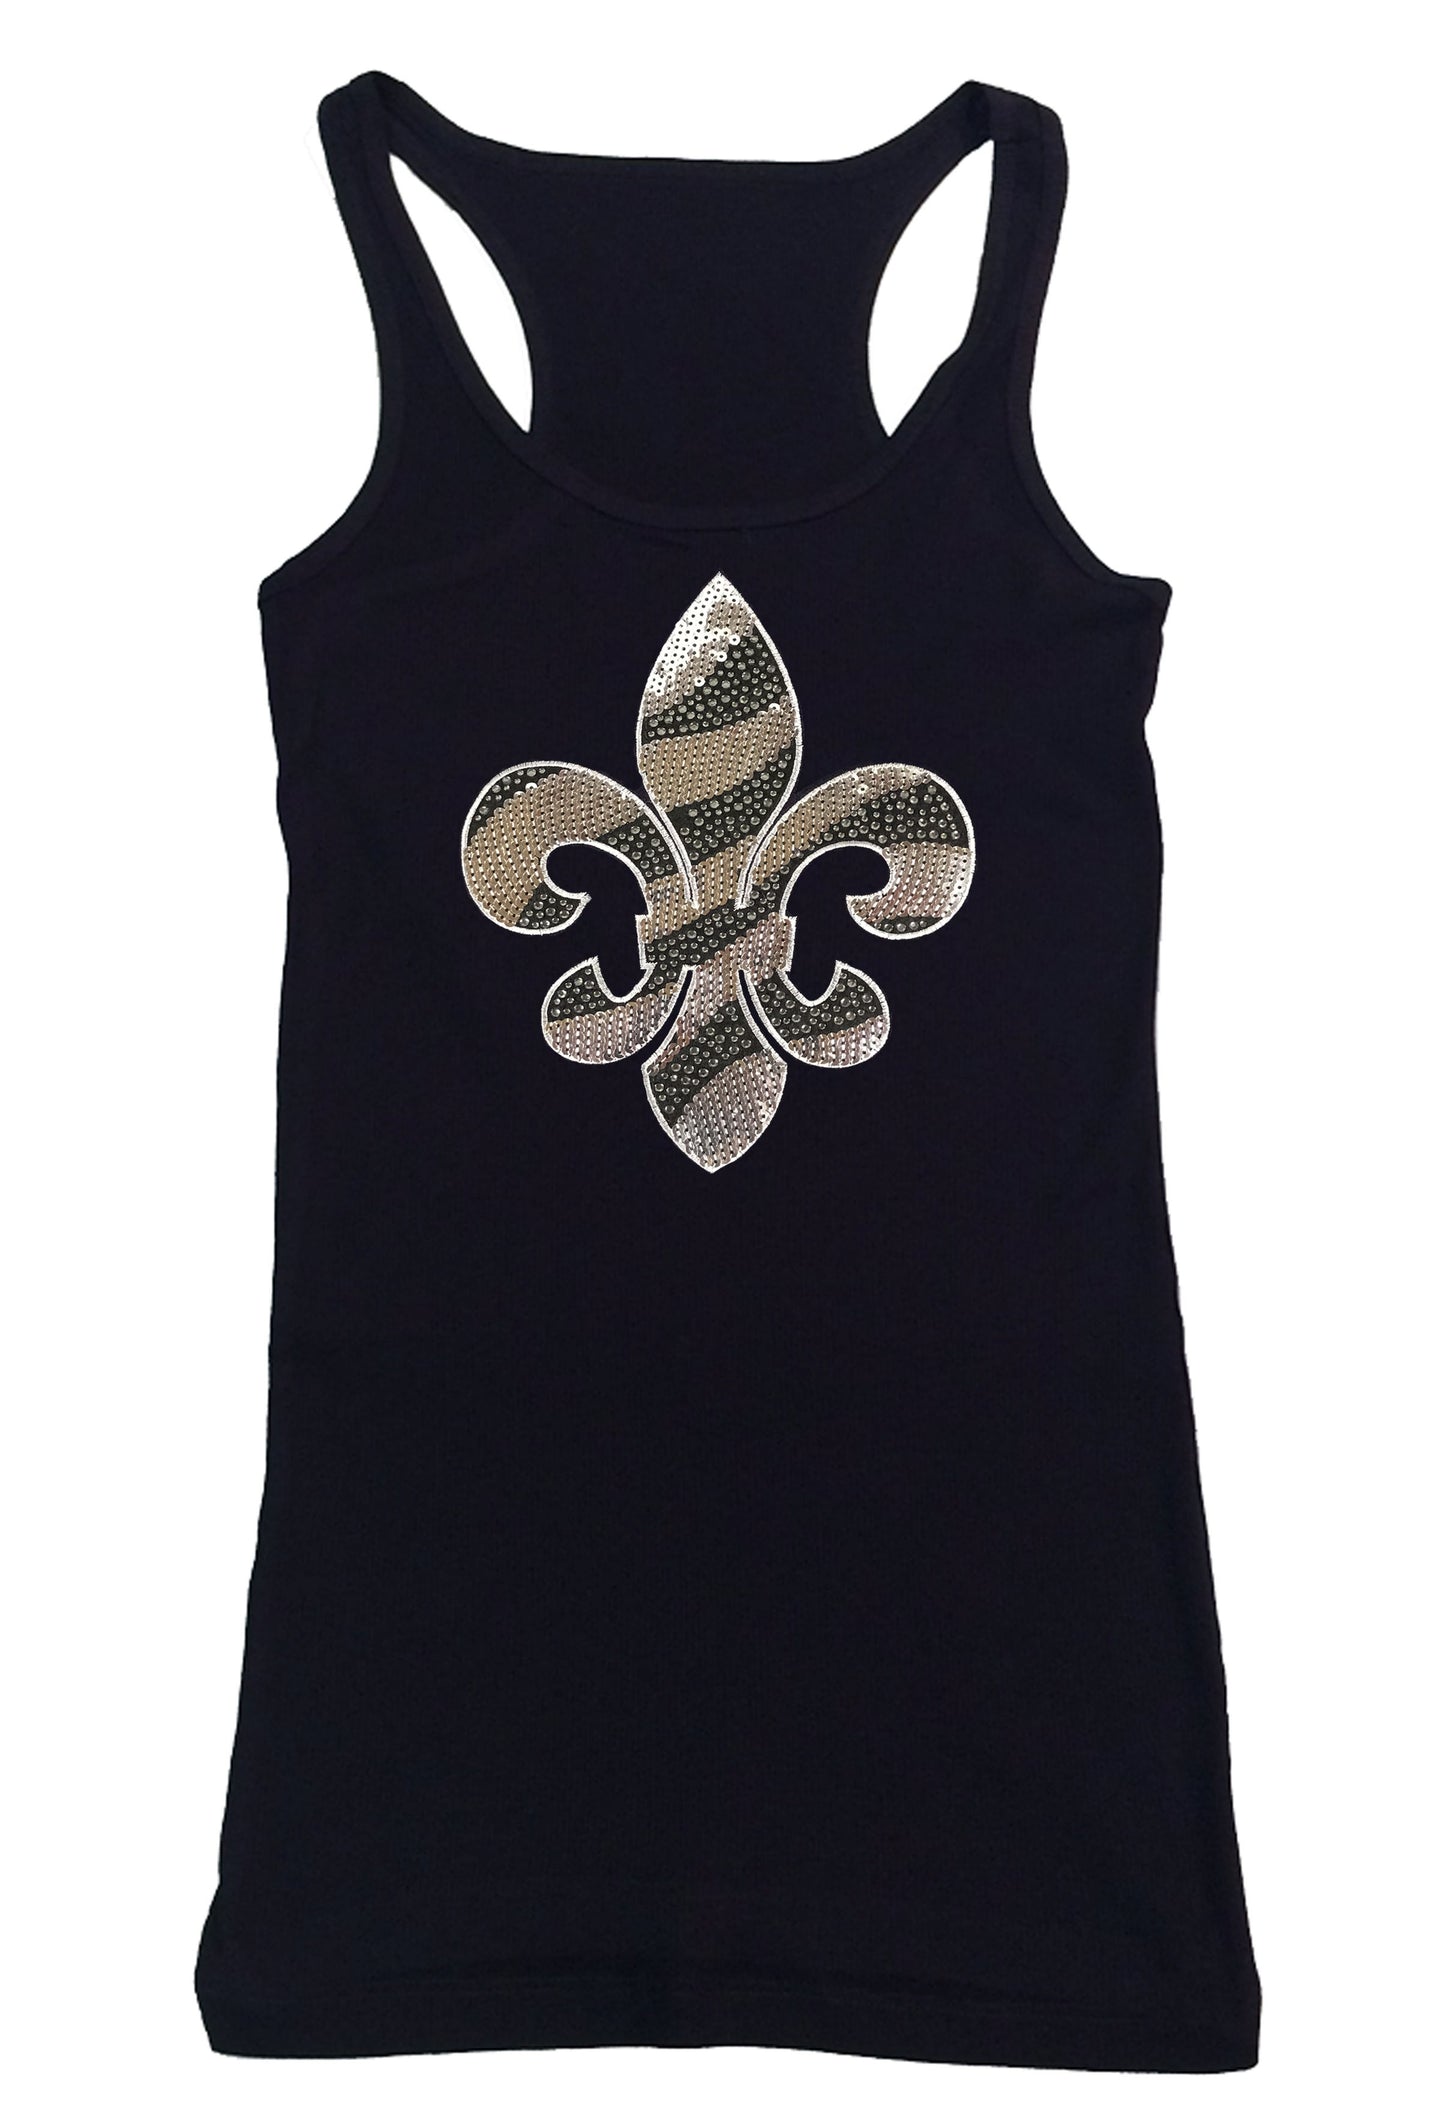 Womens T-shirt with Silver Sequins and Rhinestones Fleur de Lis